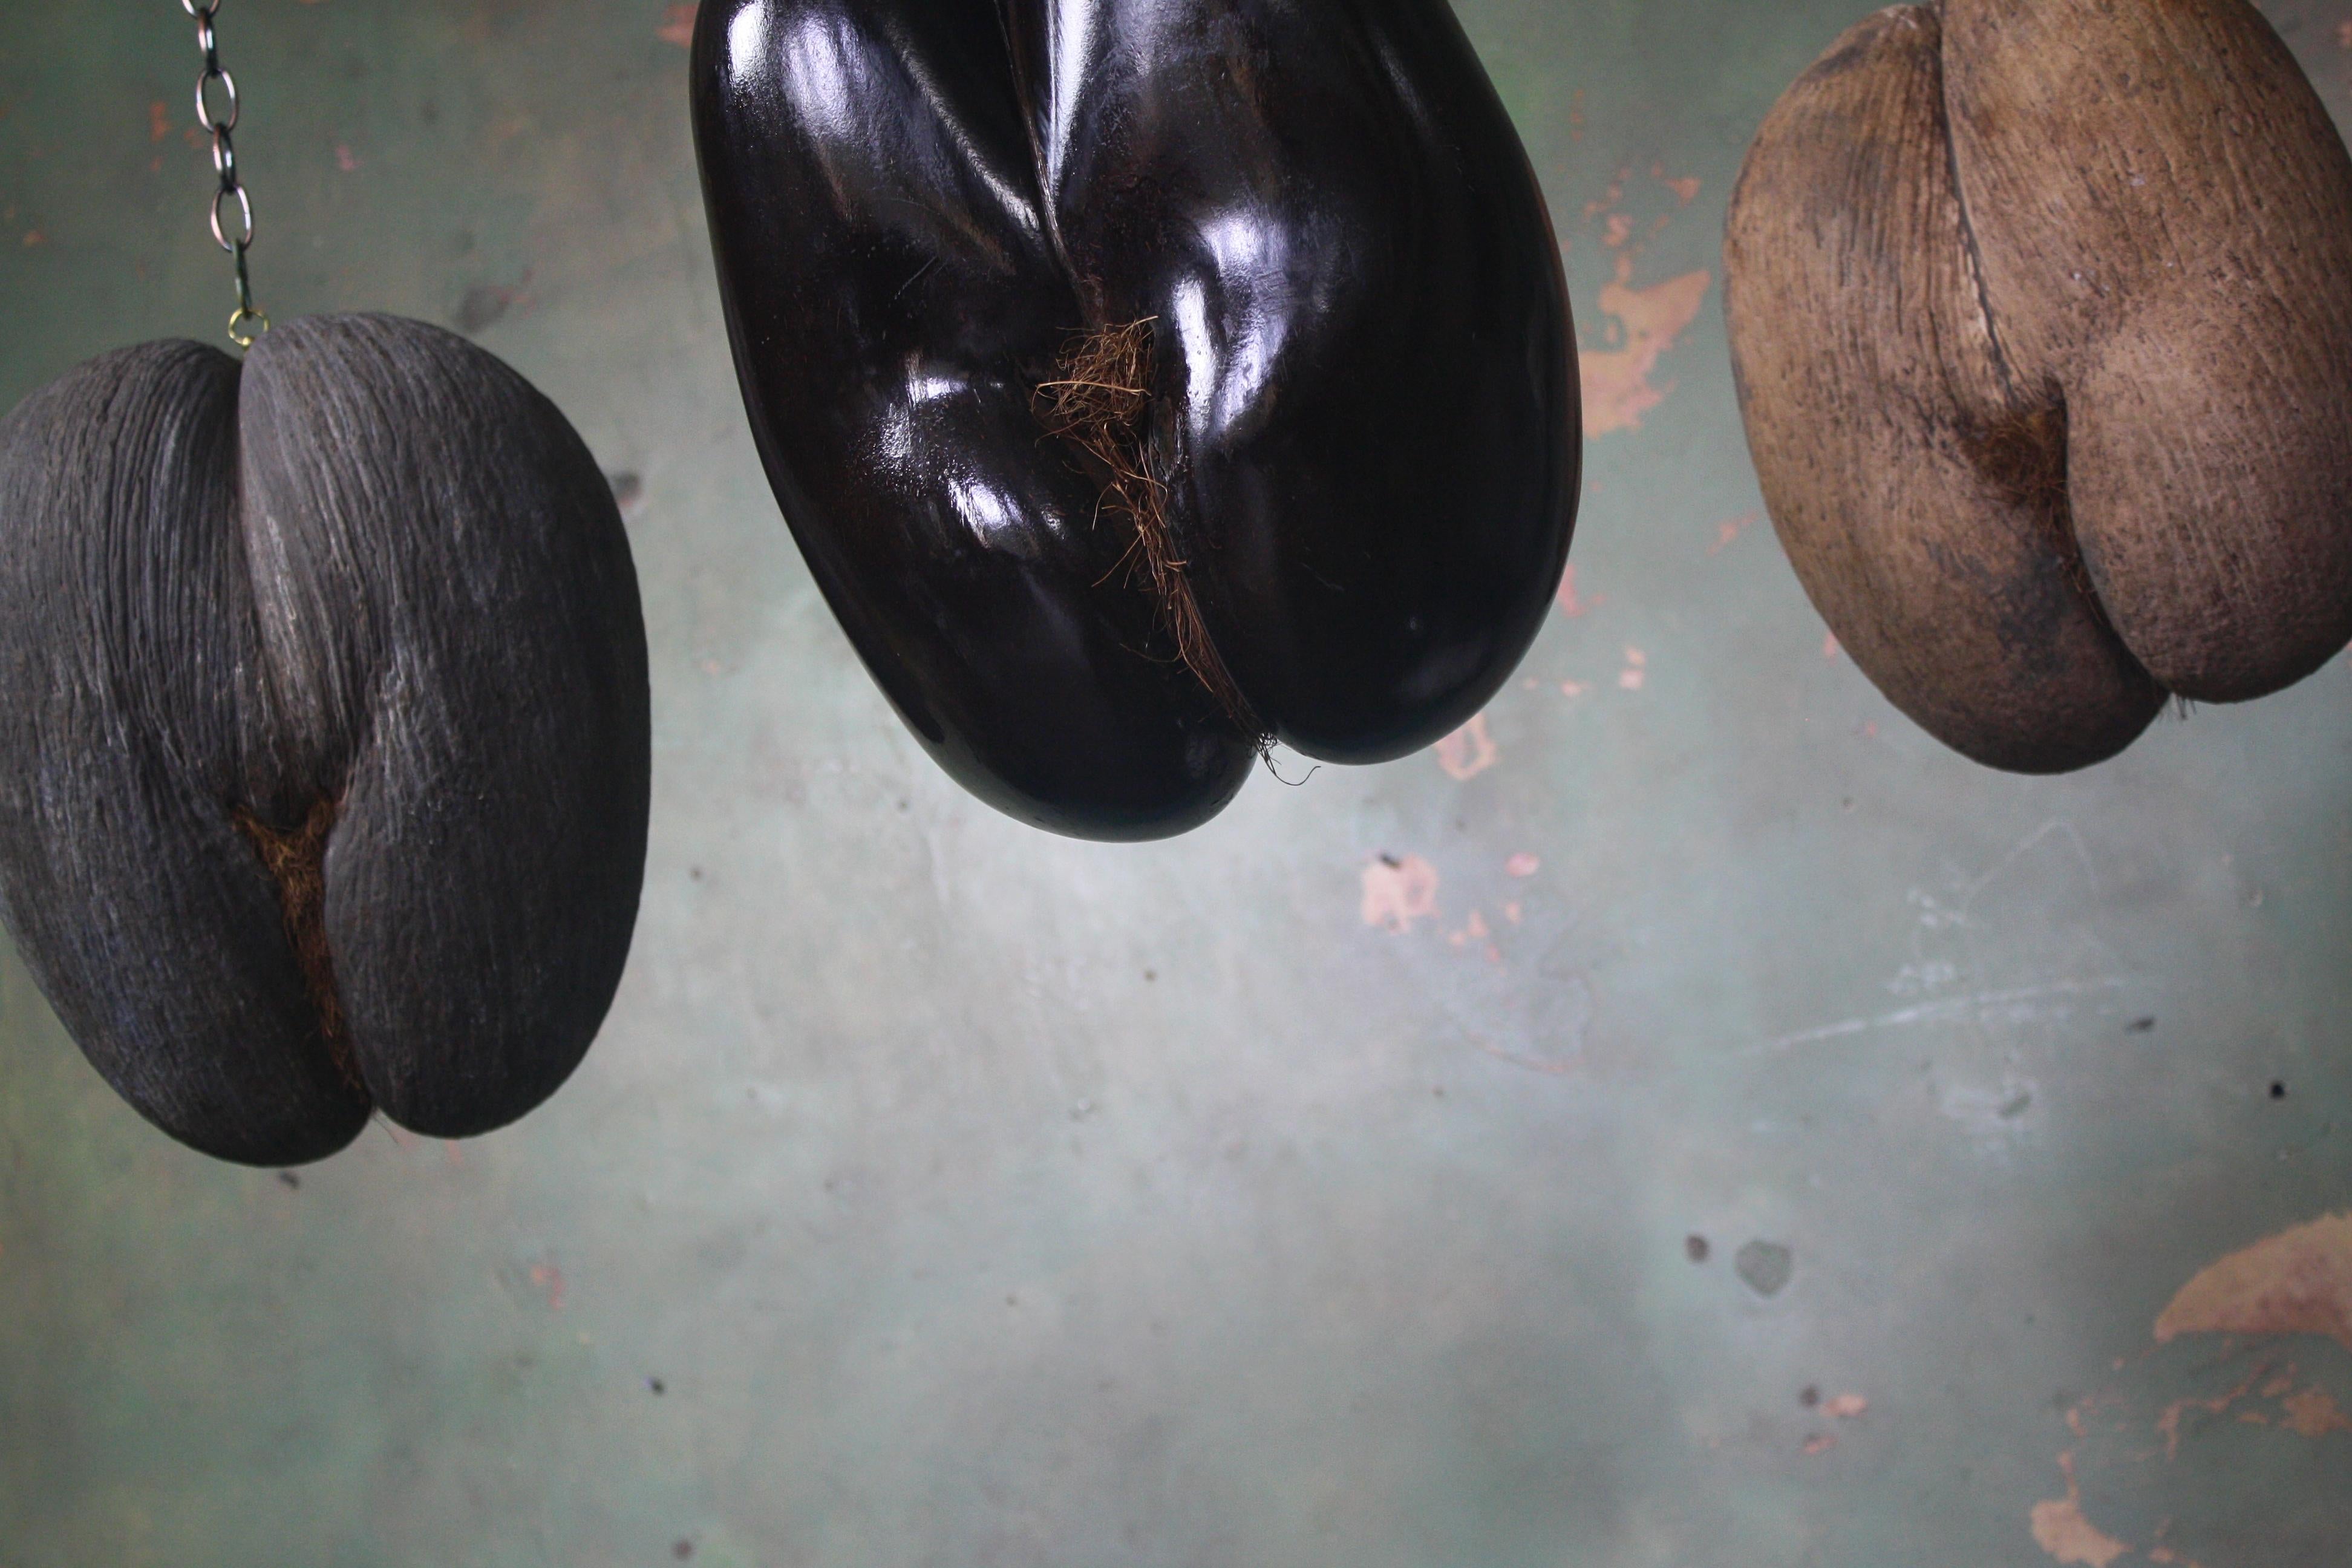 A trio of complete and large Coco De Mer's (Lodoicea maldivica), one of a polished finished, one light has a light ground and the other dark ground. Each have a brass top hook for hanging 

these nuts have many alias, commonly known as the sea